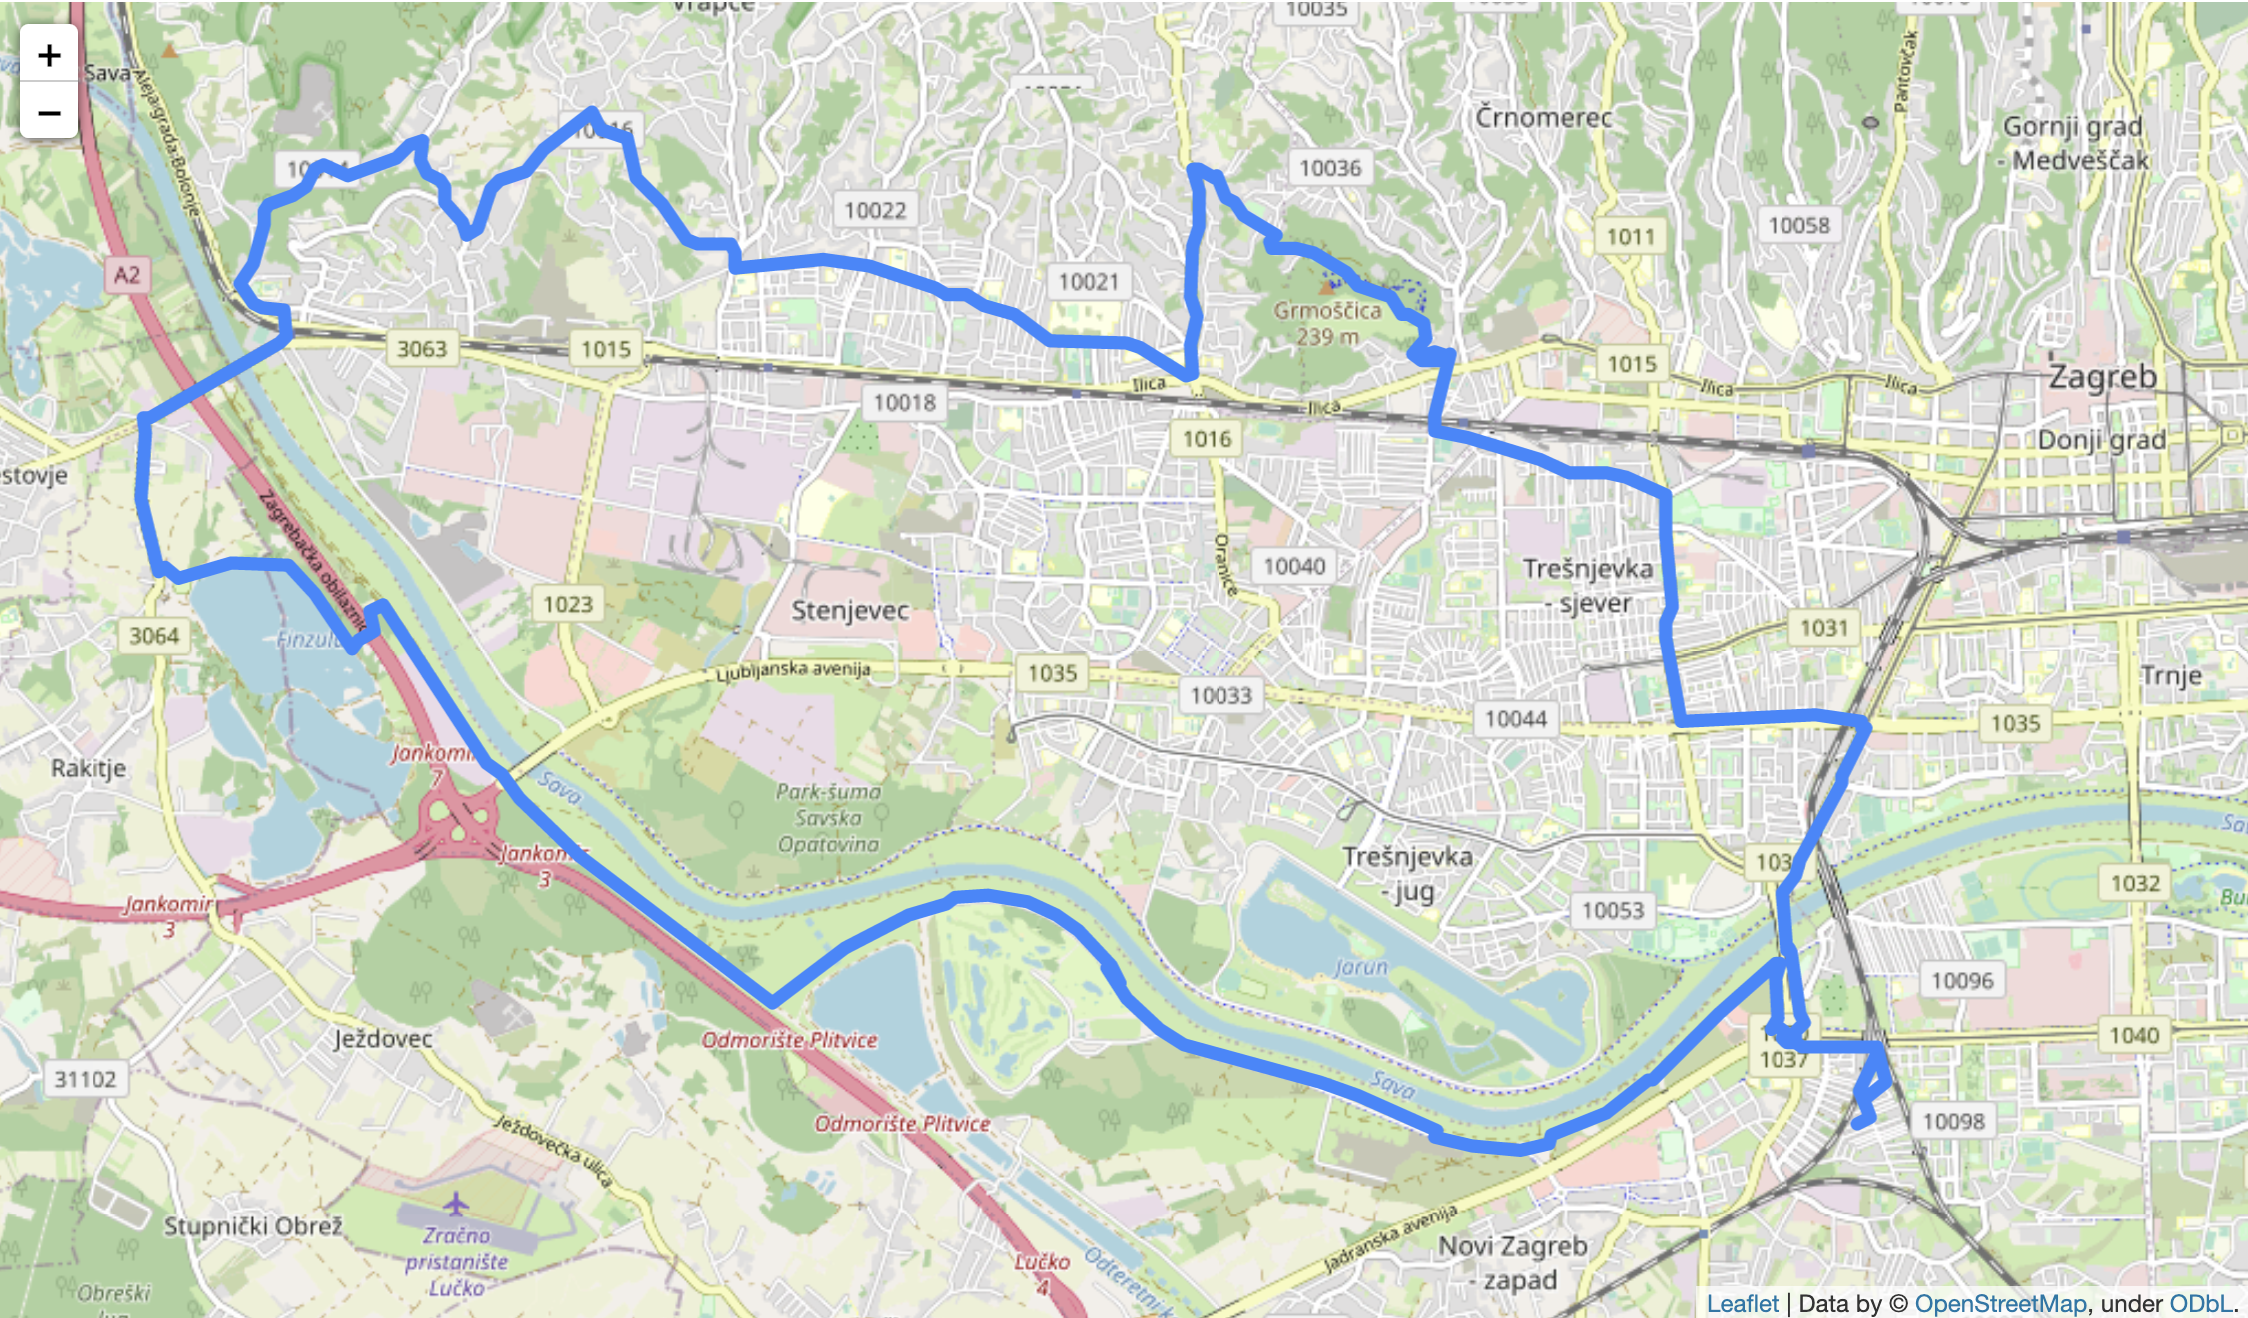 Image 5 - Visualizing Strava route with polygon lines (image by author)